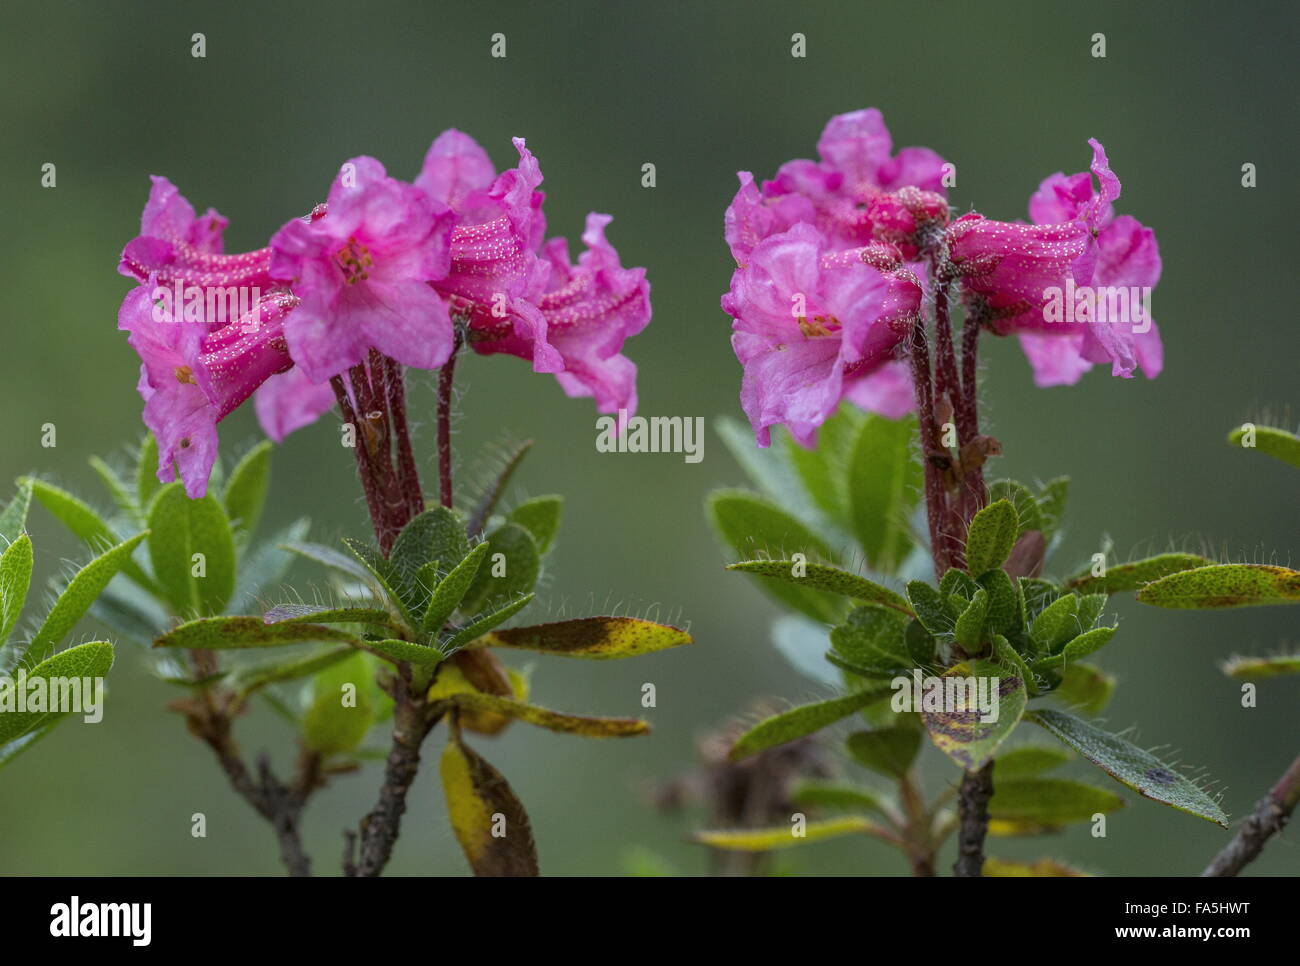 Hairy alpenrose, Rhododendron hirsutum in flower, Dolomites, Italy. Stock Photo